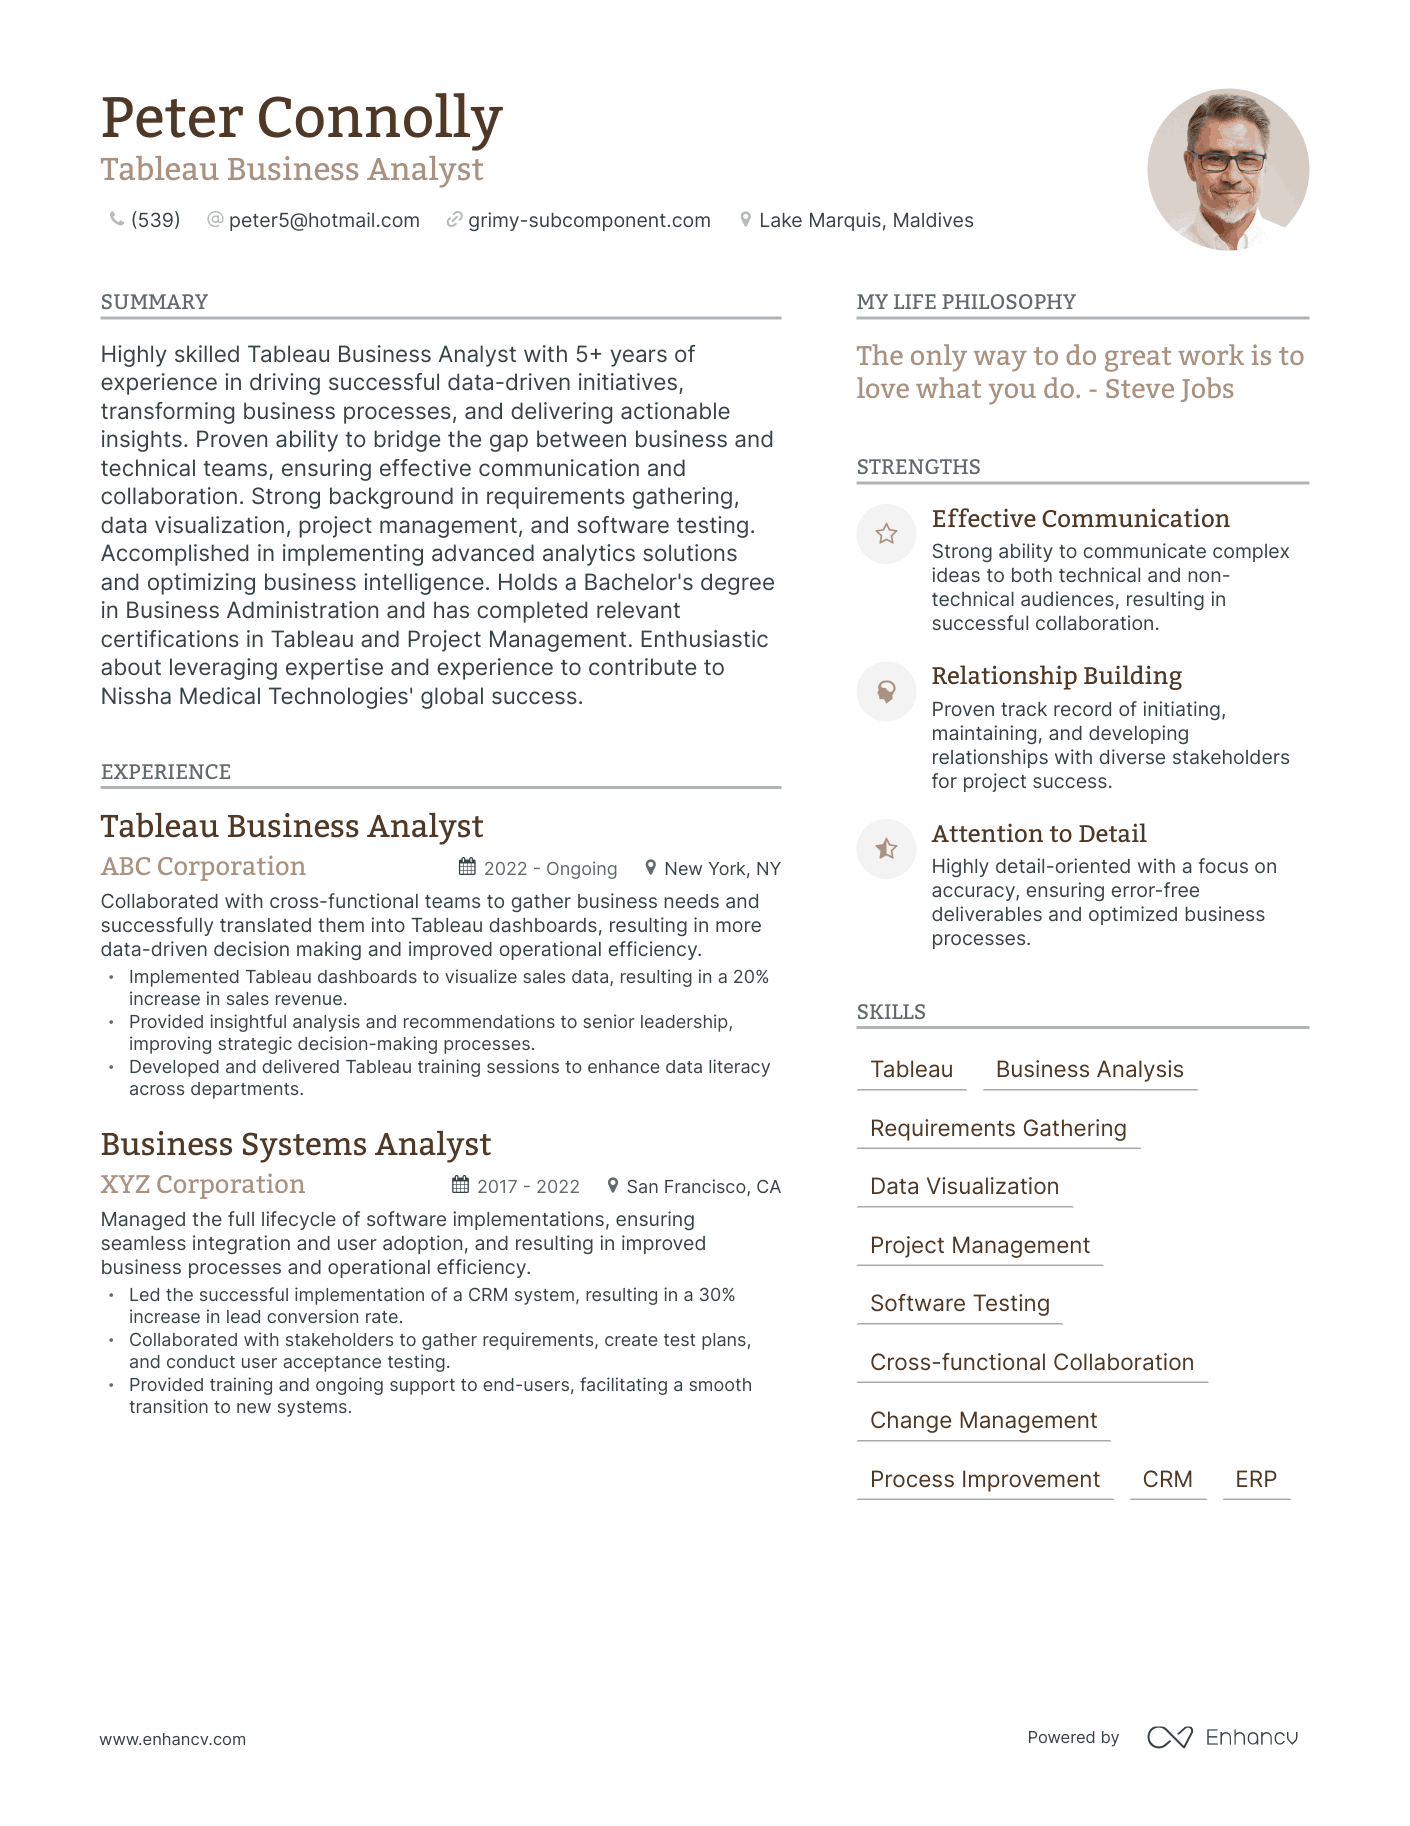 Tableau Business Analyst resume example